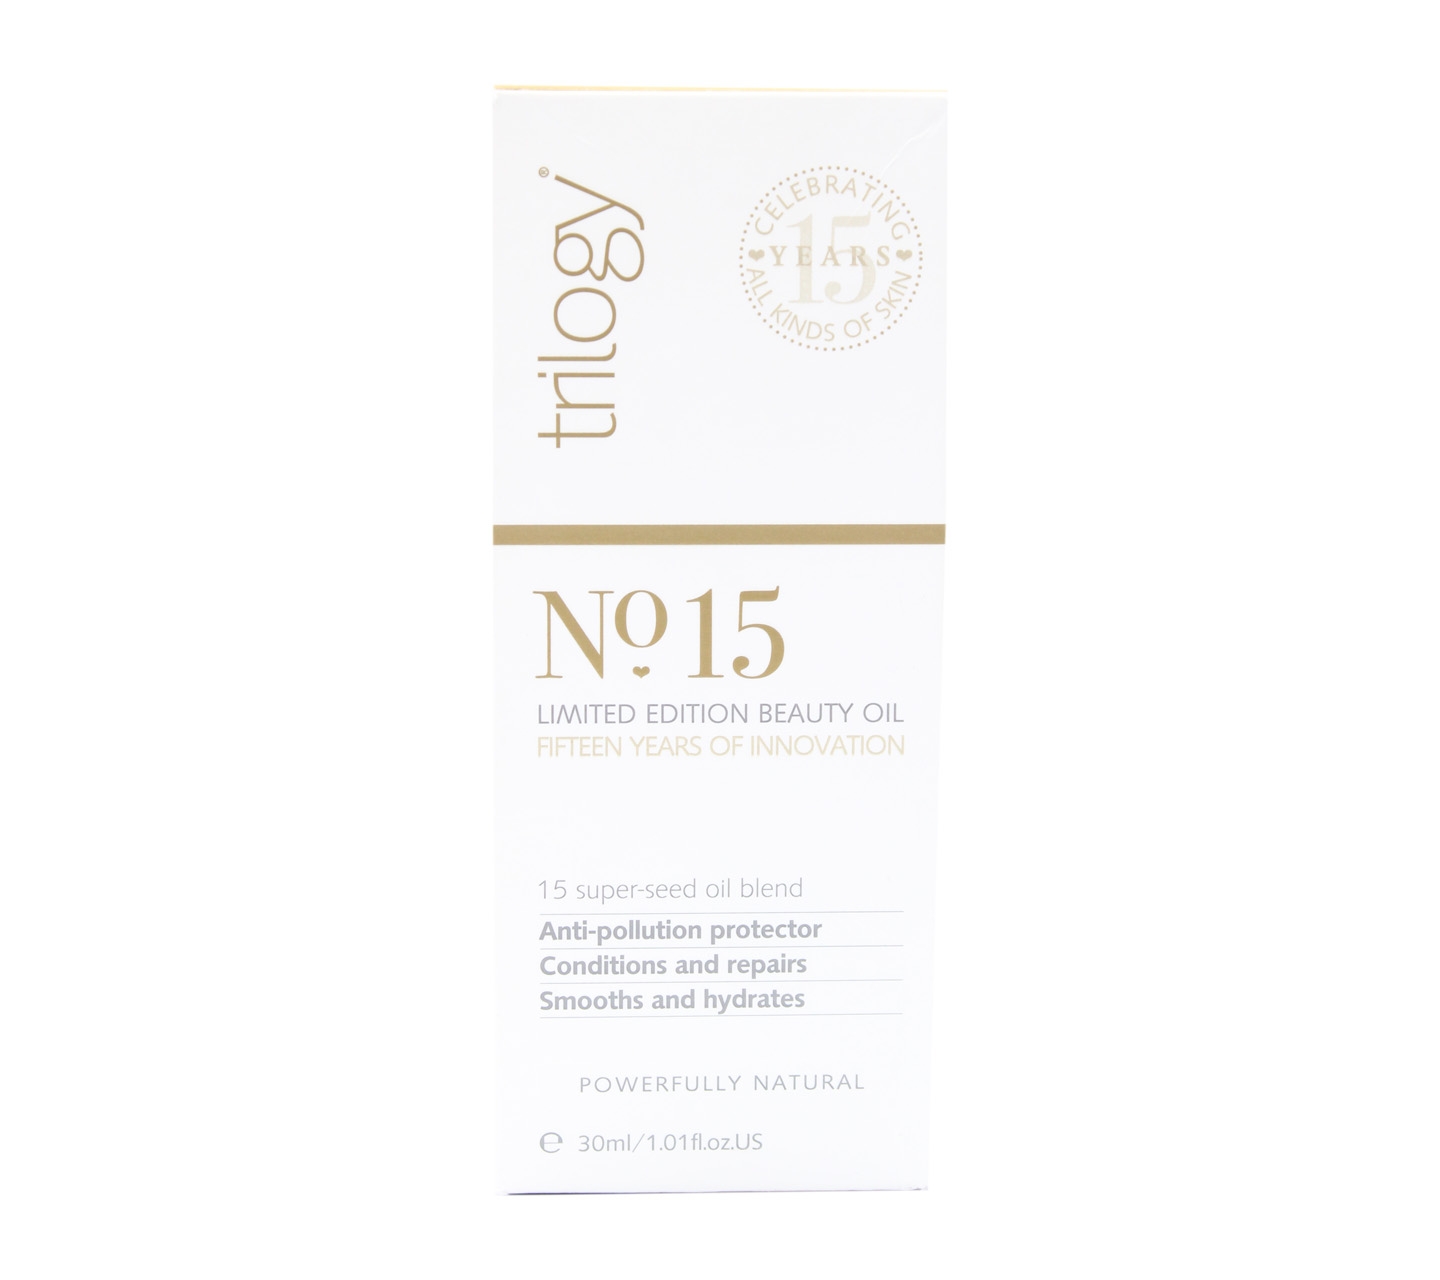 Trilogy No.15 Limited Edition Beauty Oil Skin Care